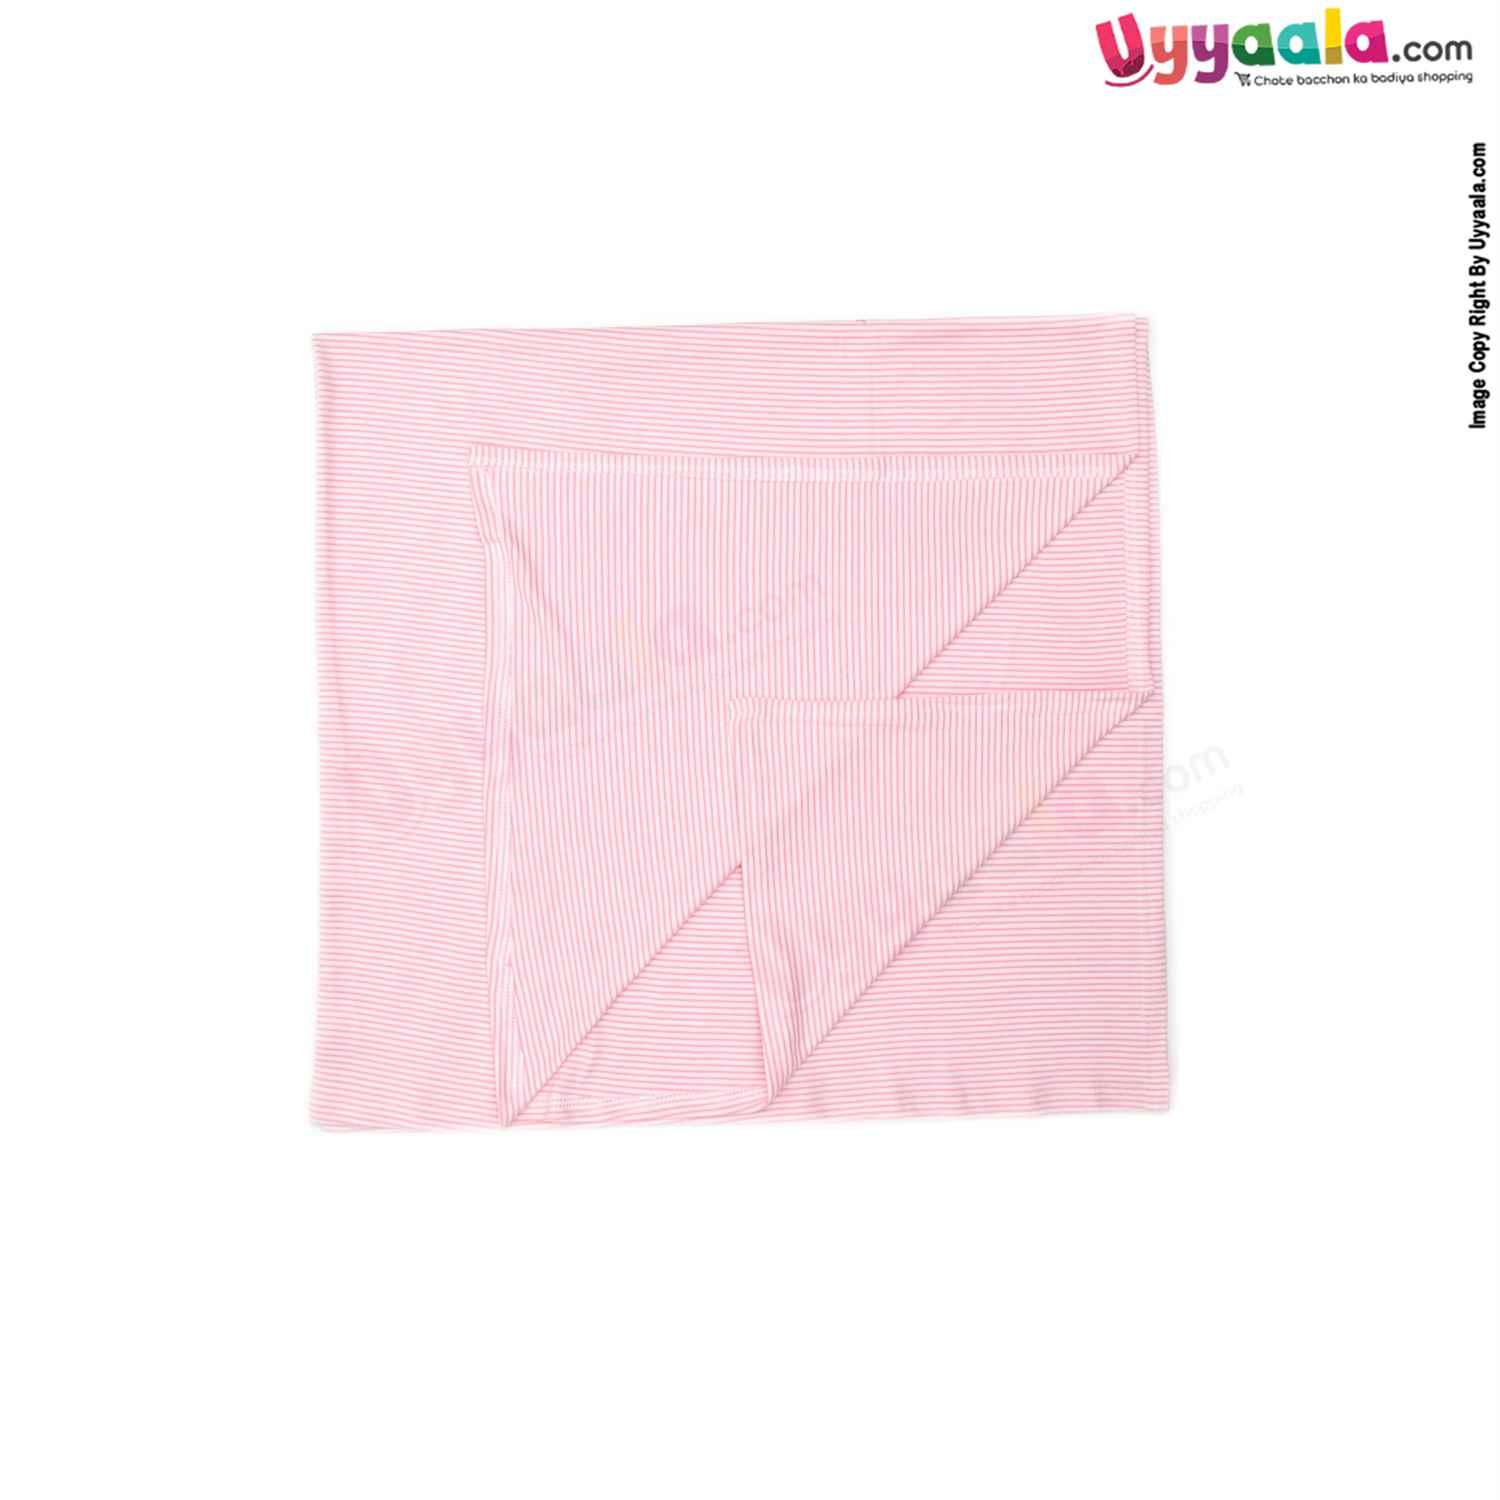 Hosiery Cotton Wrapper for Babies with Stripes Print 0-24m Age, Size (110*104cm)-Pink